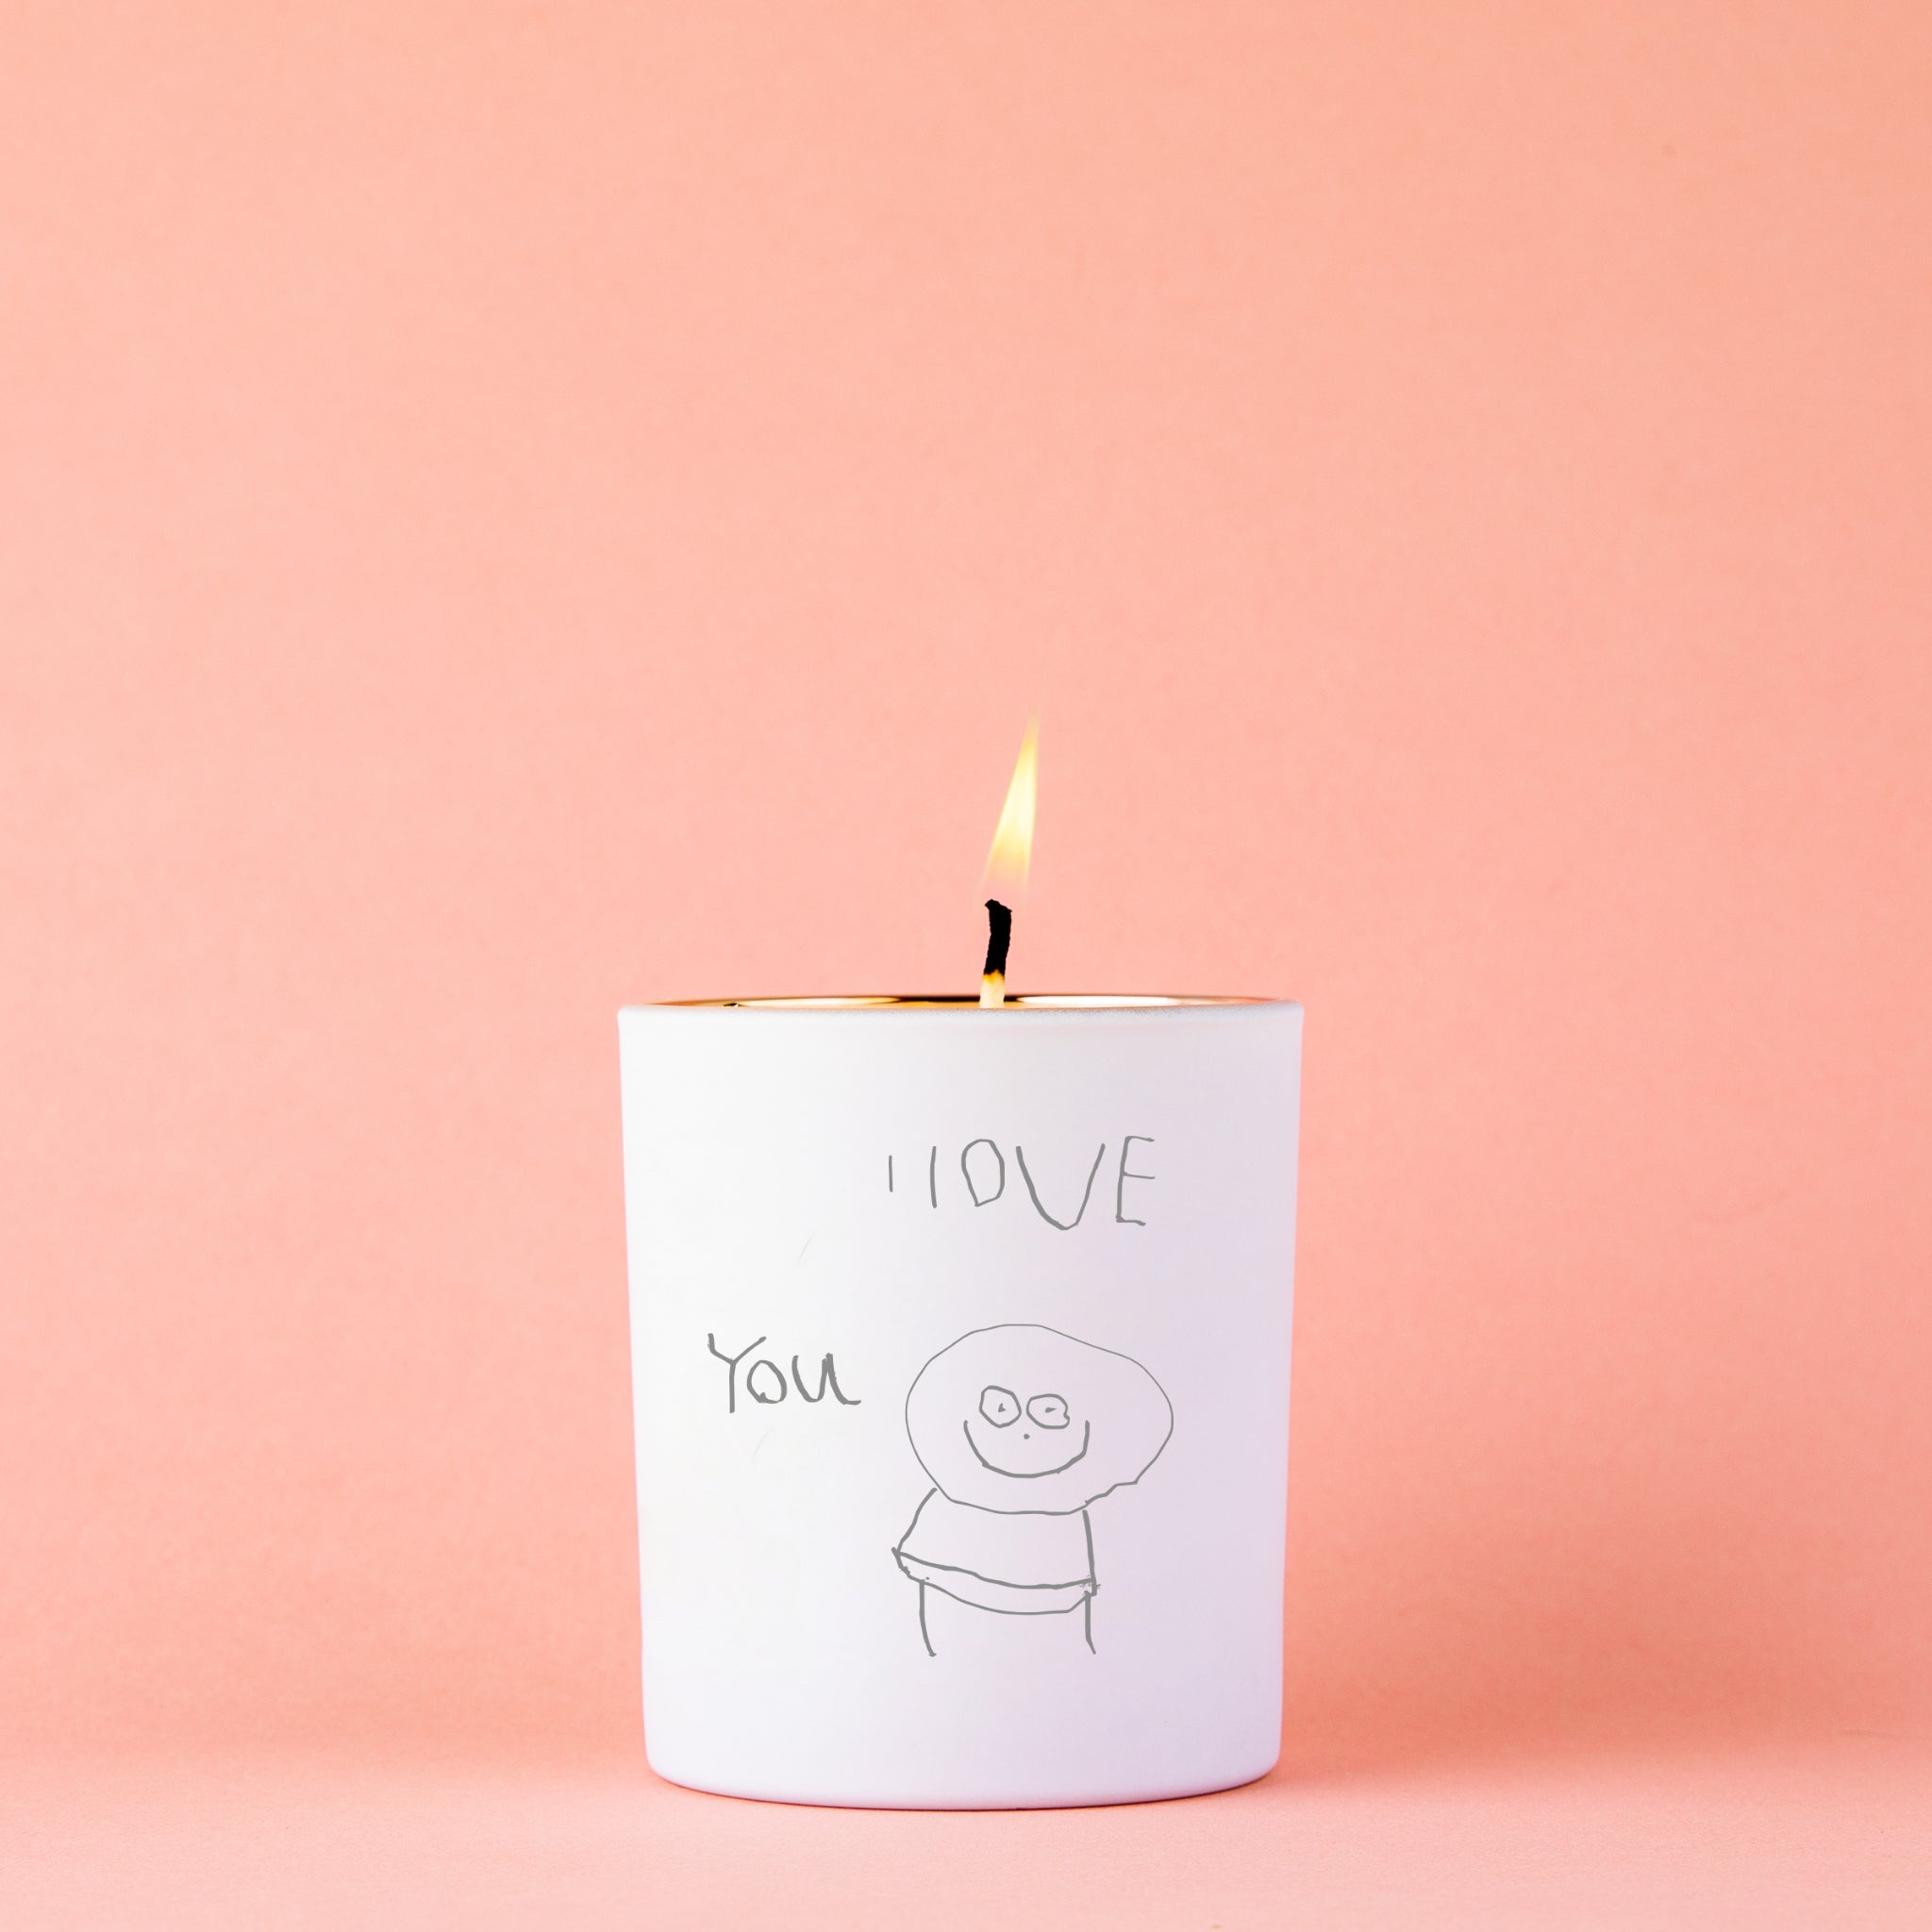 Do Candles Make Good Gifts?